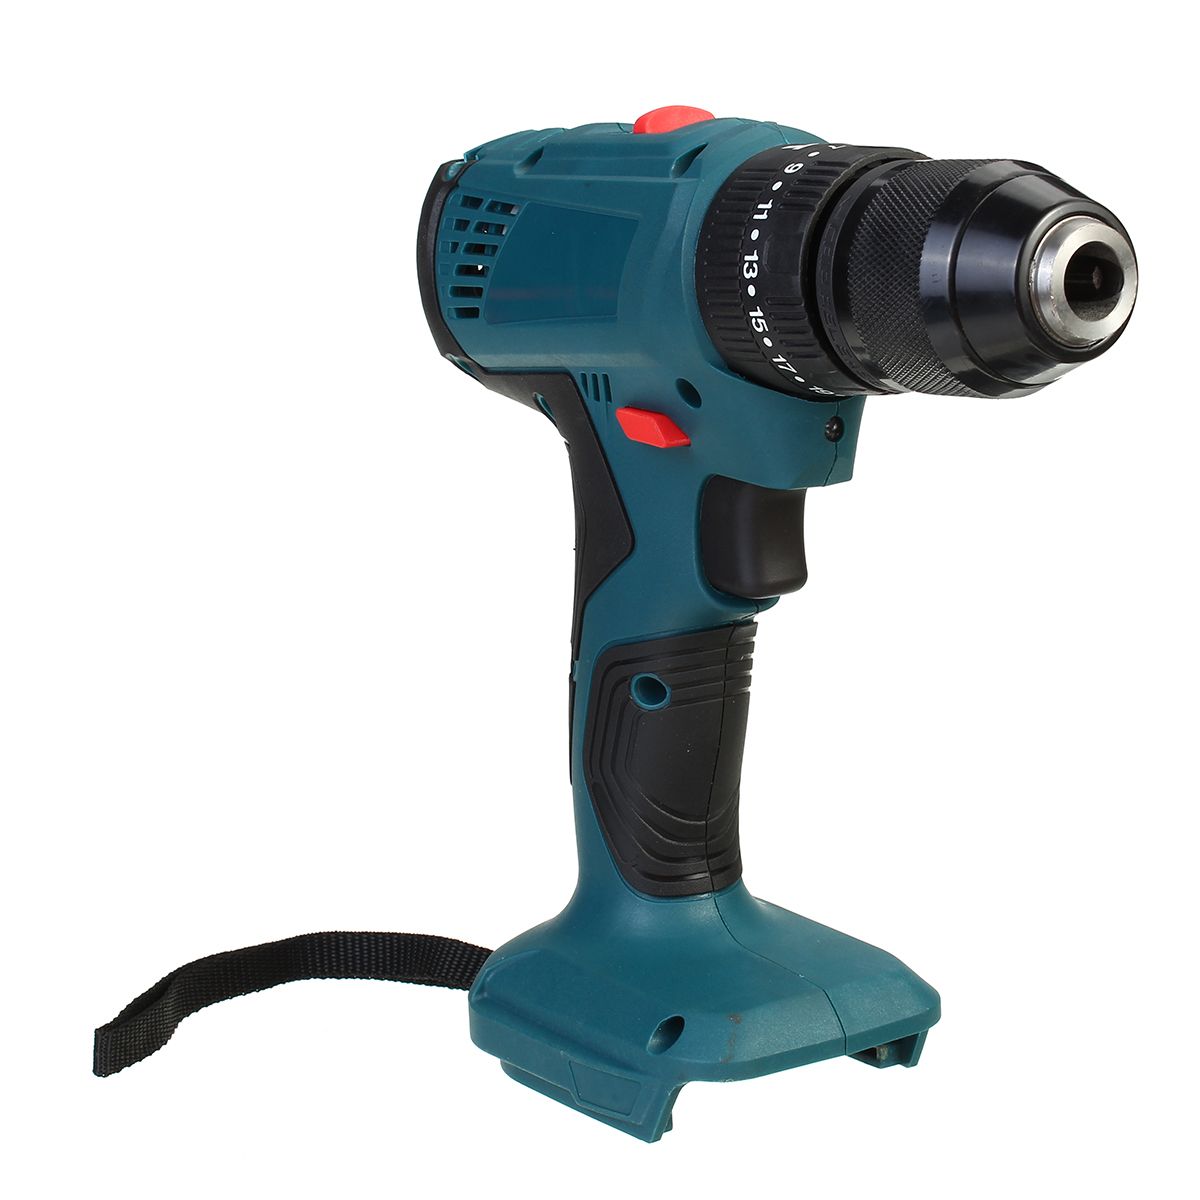 3-In-1-Cordless-Rechargeable-Electric-Screwdriver-Impact-Drill-10mm-for-18V-Makita-Battery-1704029